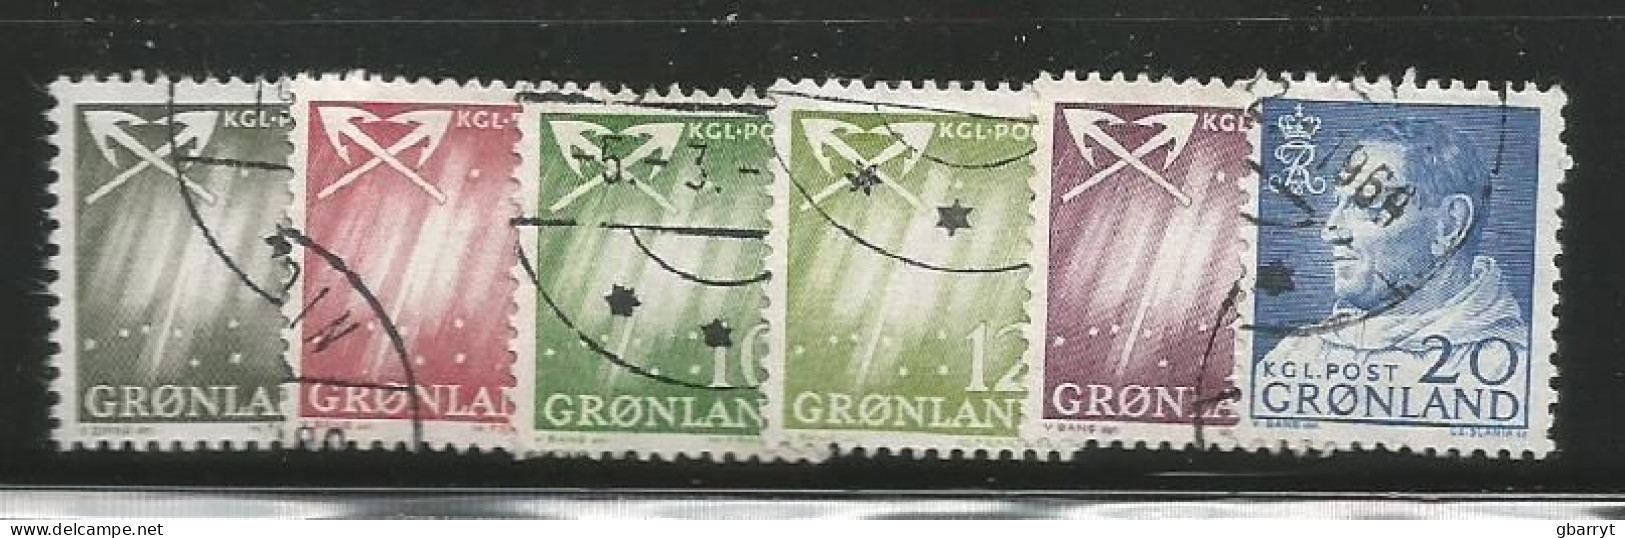 Greenland Scott # 48 - 65 Used VF.complete.......................................w64 - Oblitérés